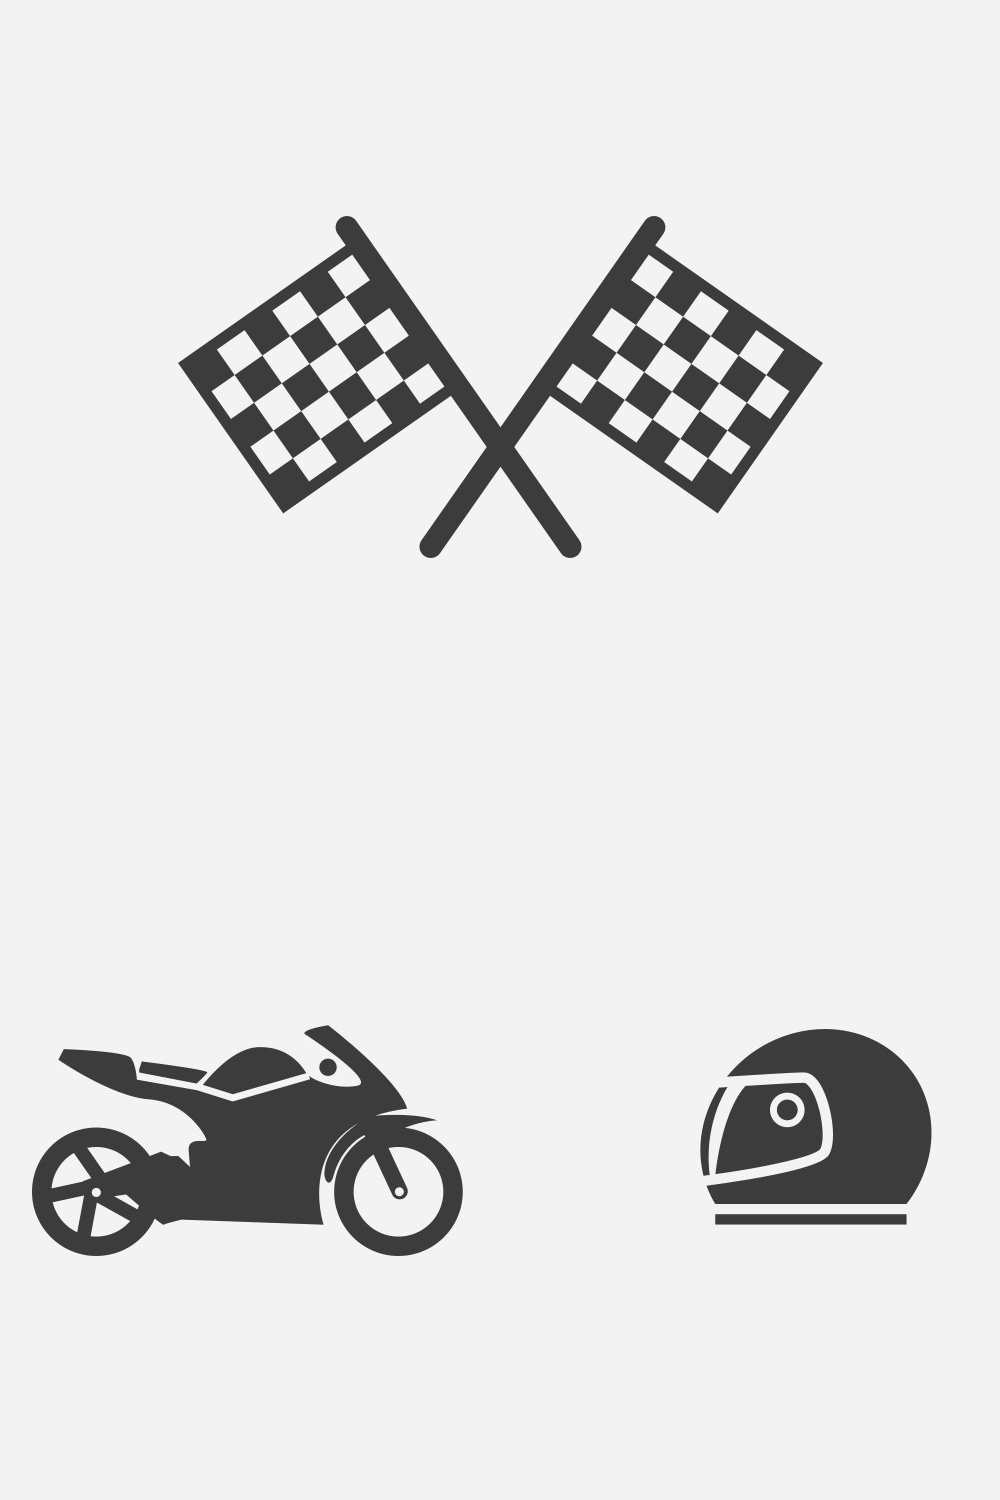 Illustrations 12 racing and car icons of pinterest.